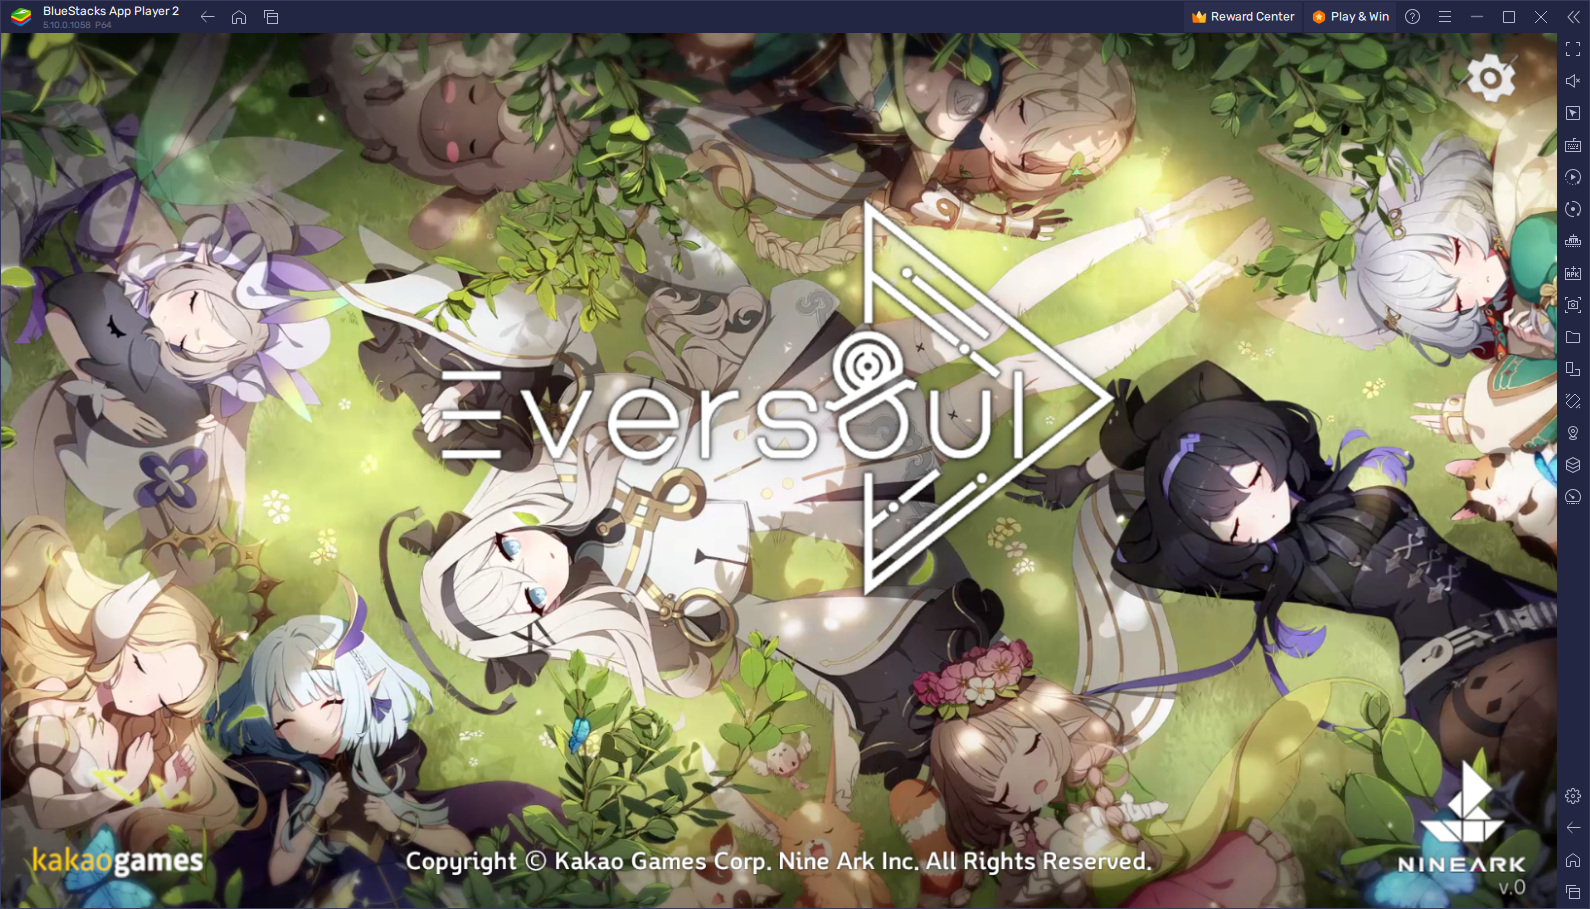 Eversoul Review - A Brand New Entry Into the Gacha RPG Genre